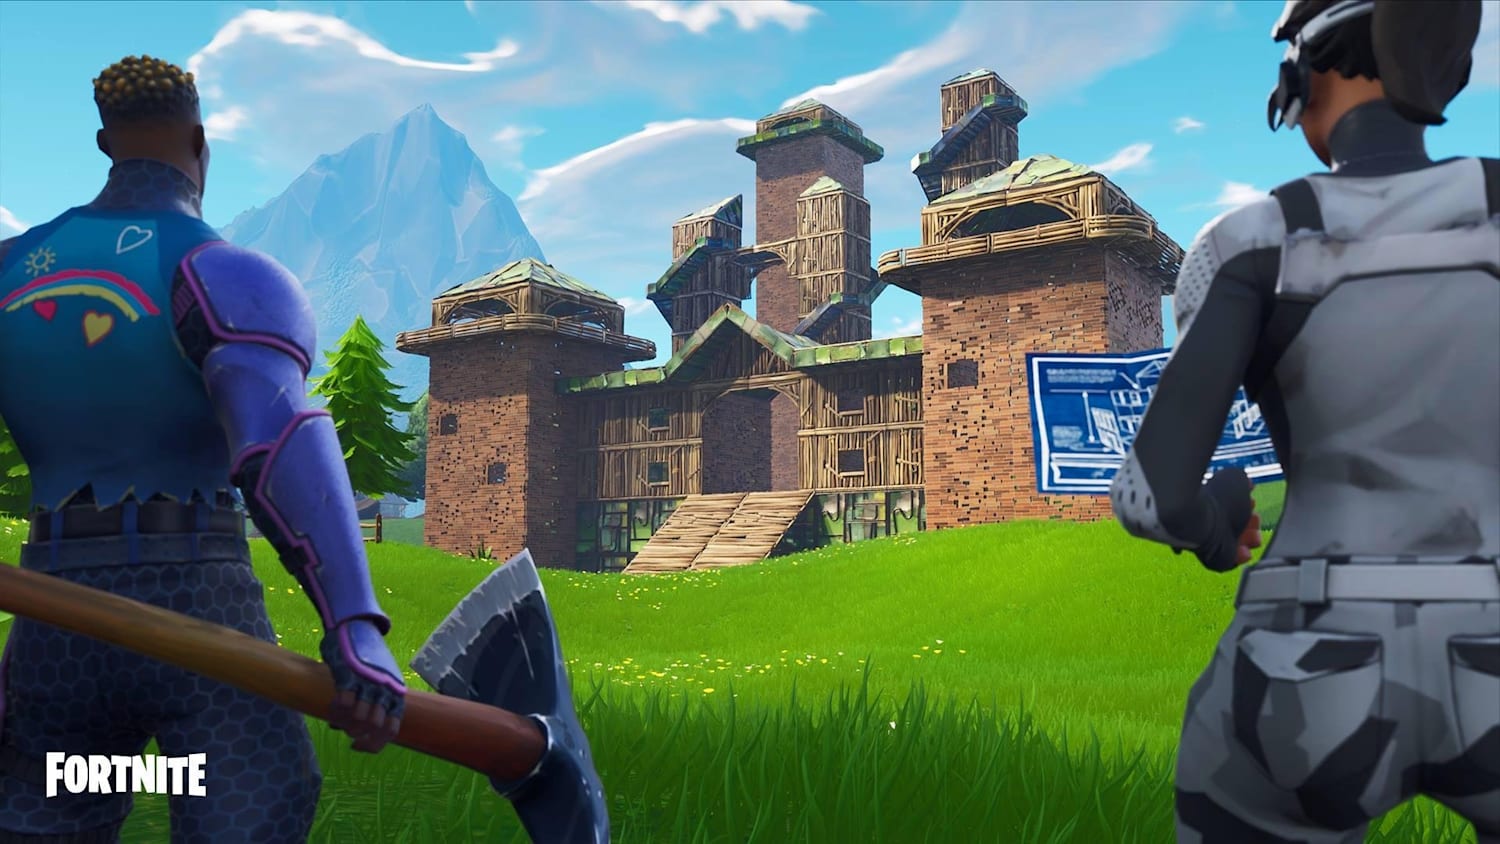 Fortnite News, Tips and Tricks, Guides and More